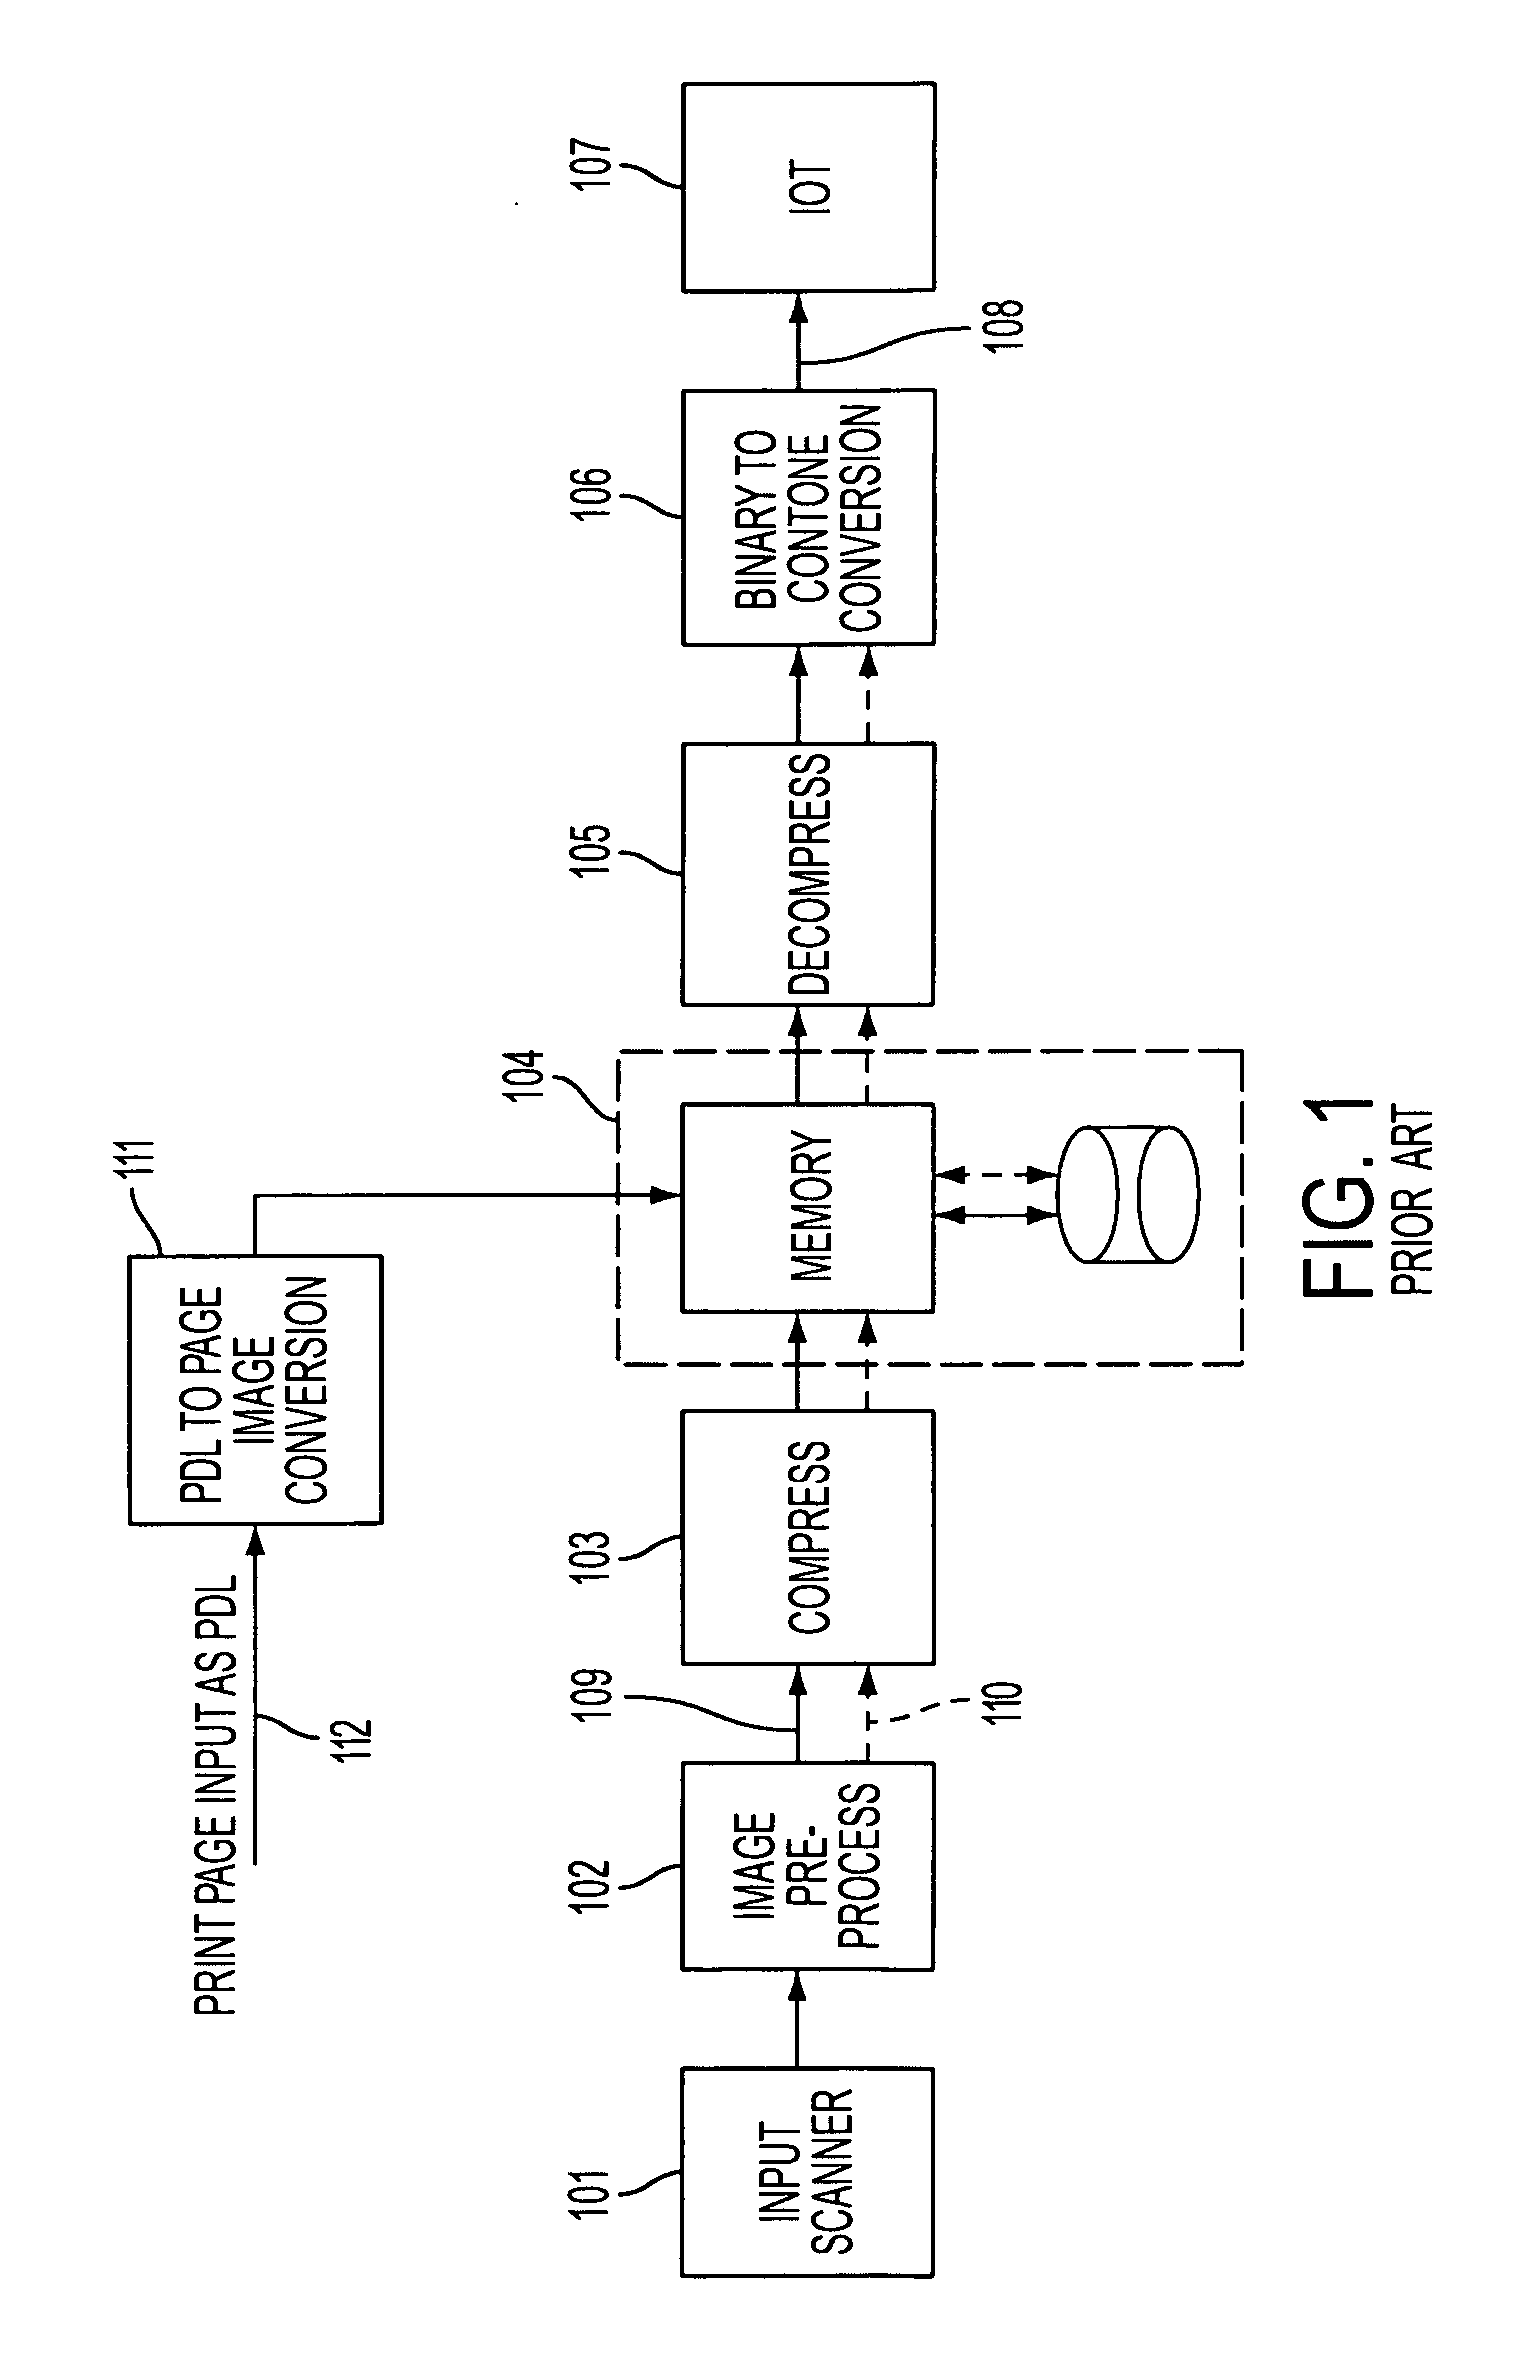 Method and system for improved copy quality in a multifunction reprographic system